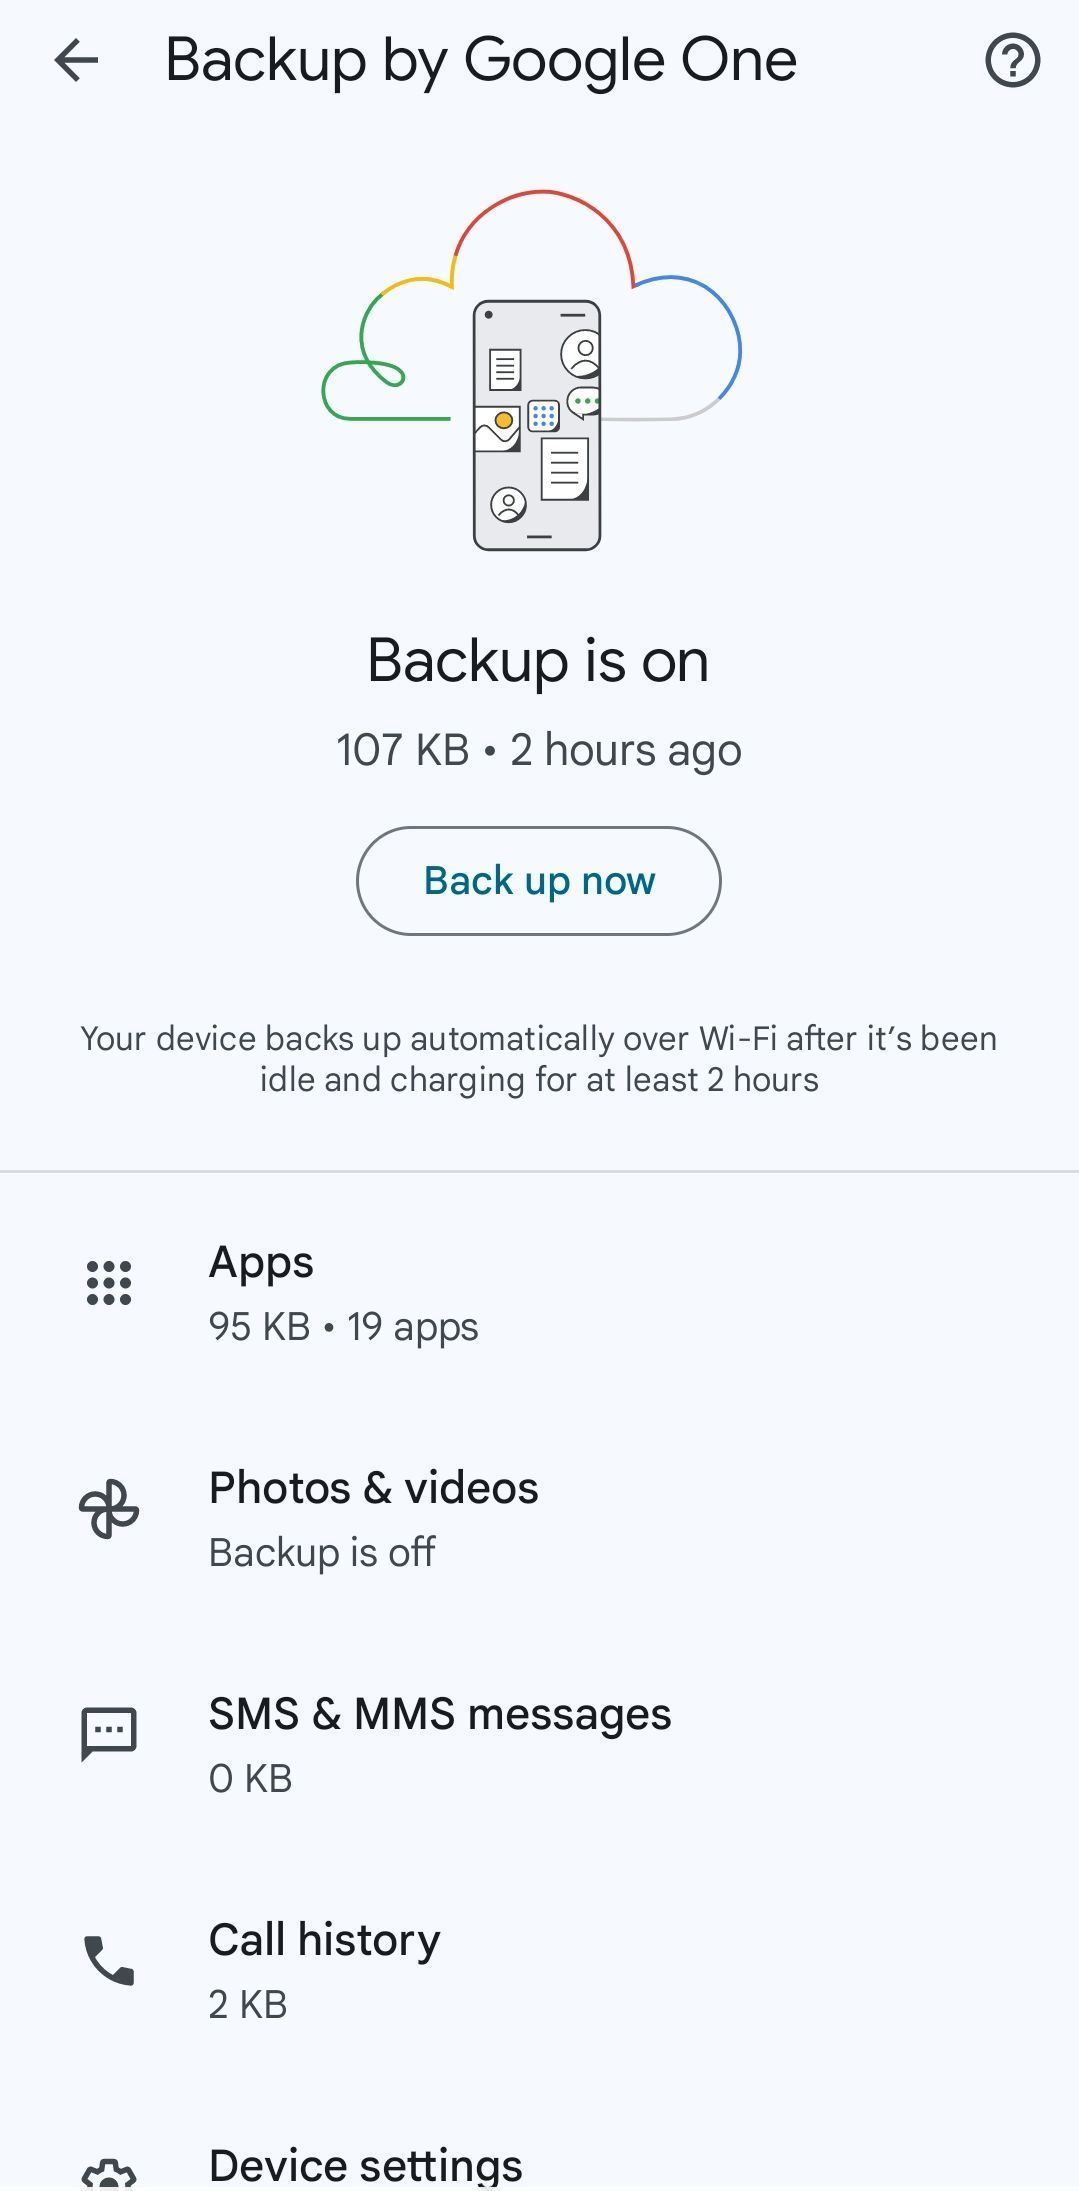 Screenshot of 'Back up now' option in Google One